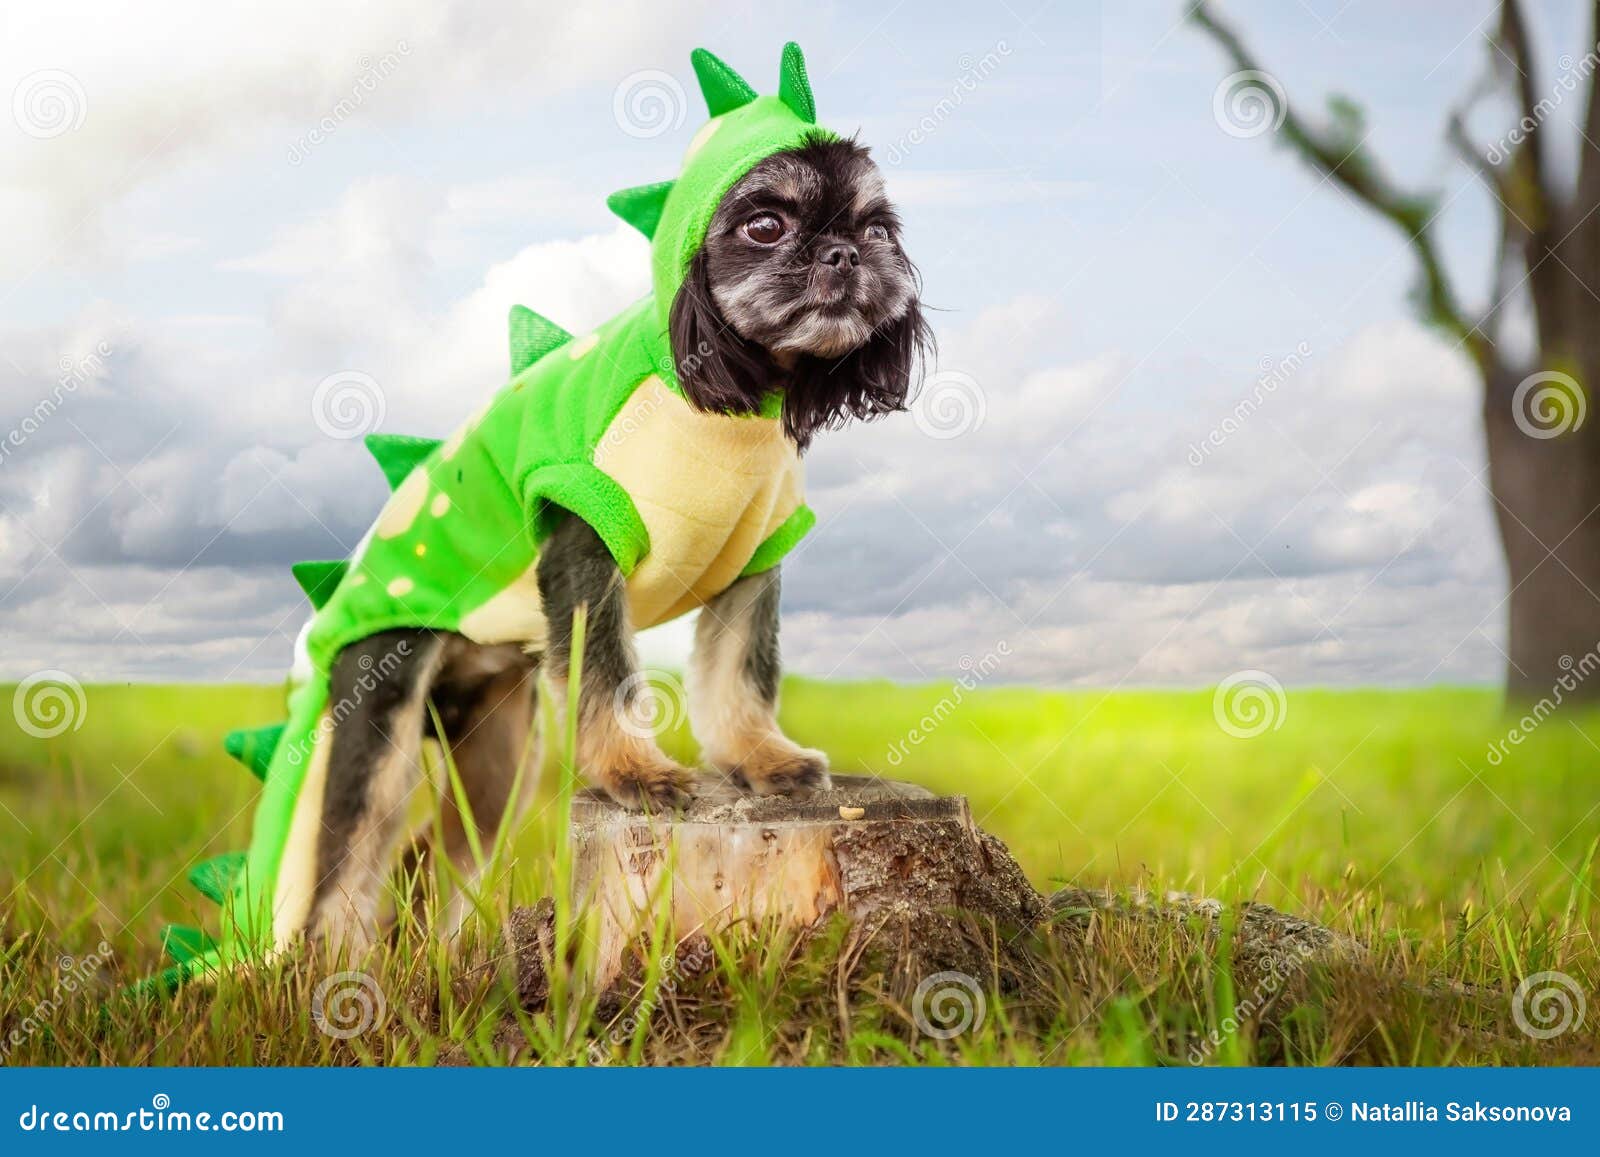 Halloween Drinking Games  Pugs and Dinosaurs – Pugs and Dinosaurs